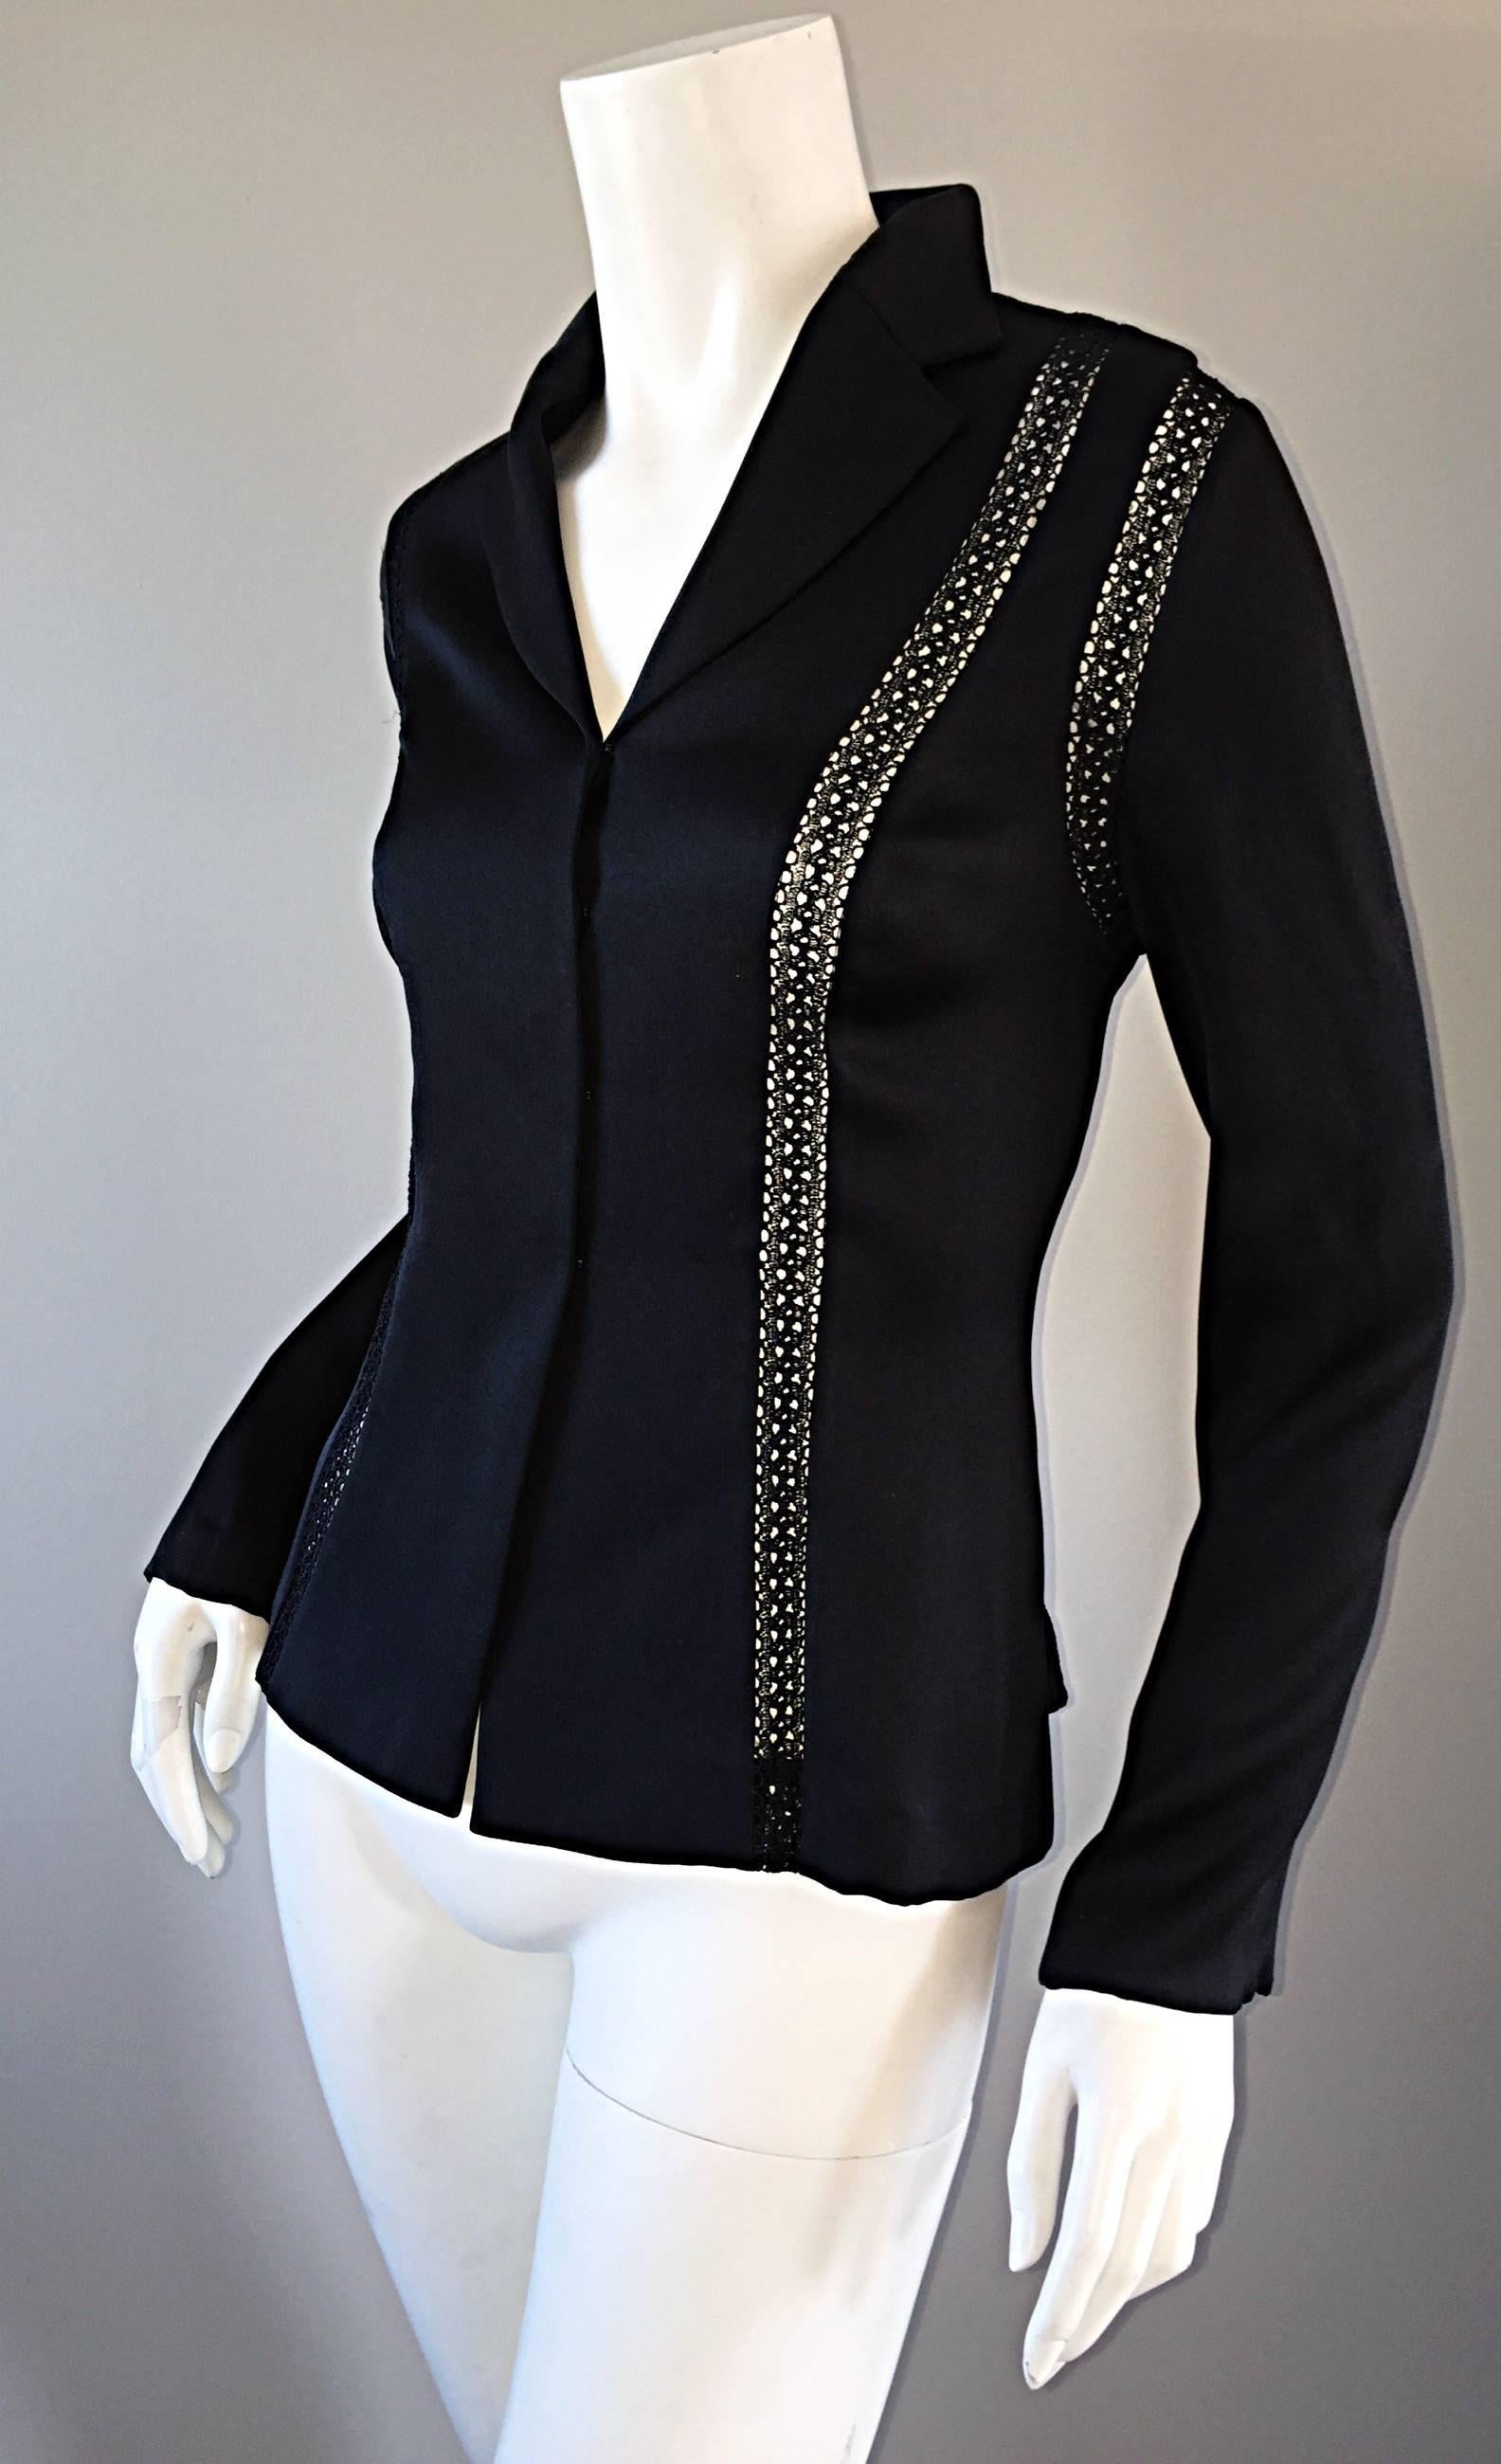 Beautiful vintage Richard Tyler black silk blouse! Features cut-out panels on the front and back. Luxurious soft silk, with hook-and-eye closures down the bodice. Wonderful tailored fit! Can be worn buttoned all the way up, or left partially open.